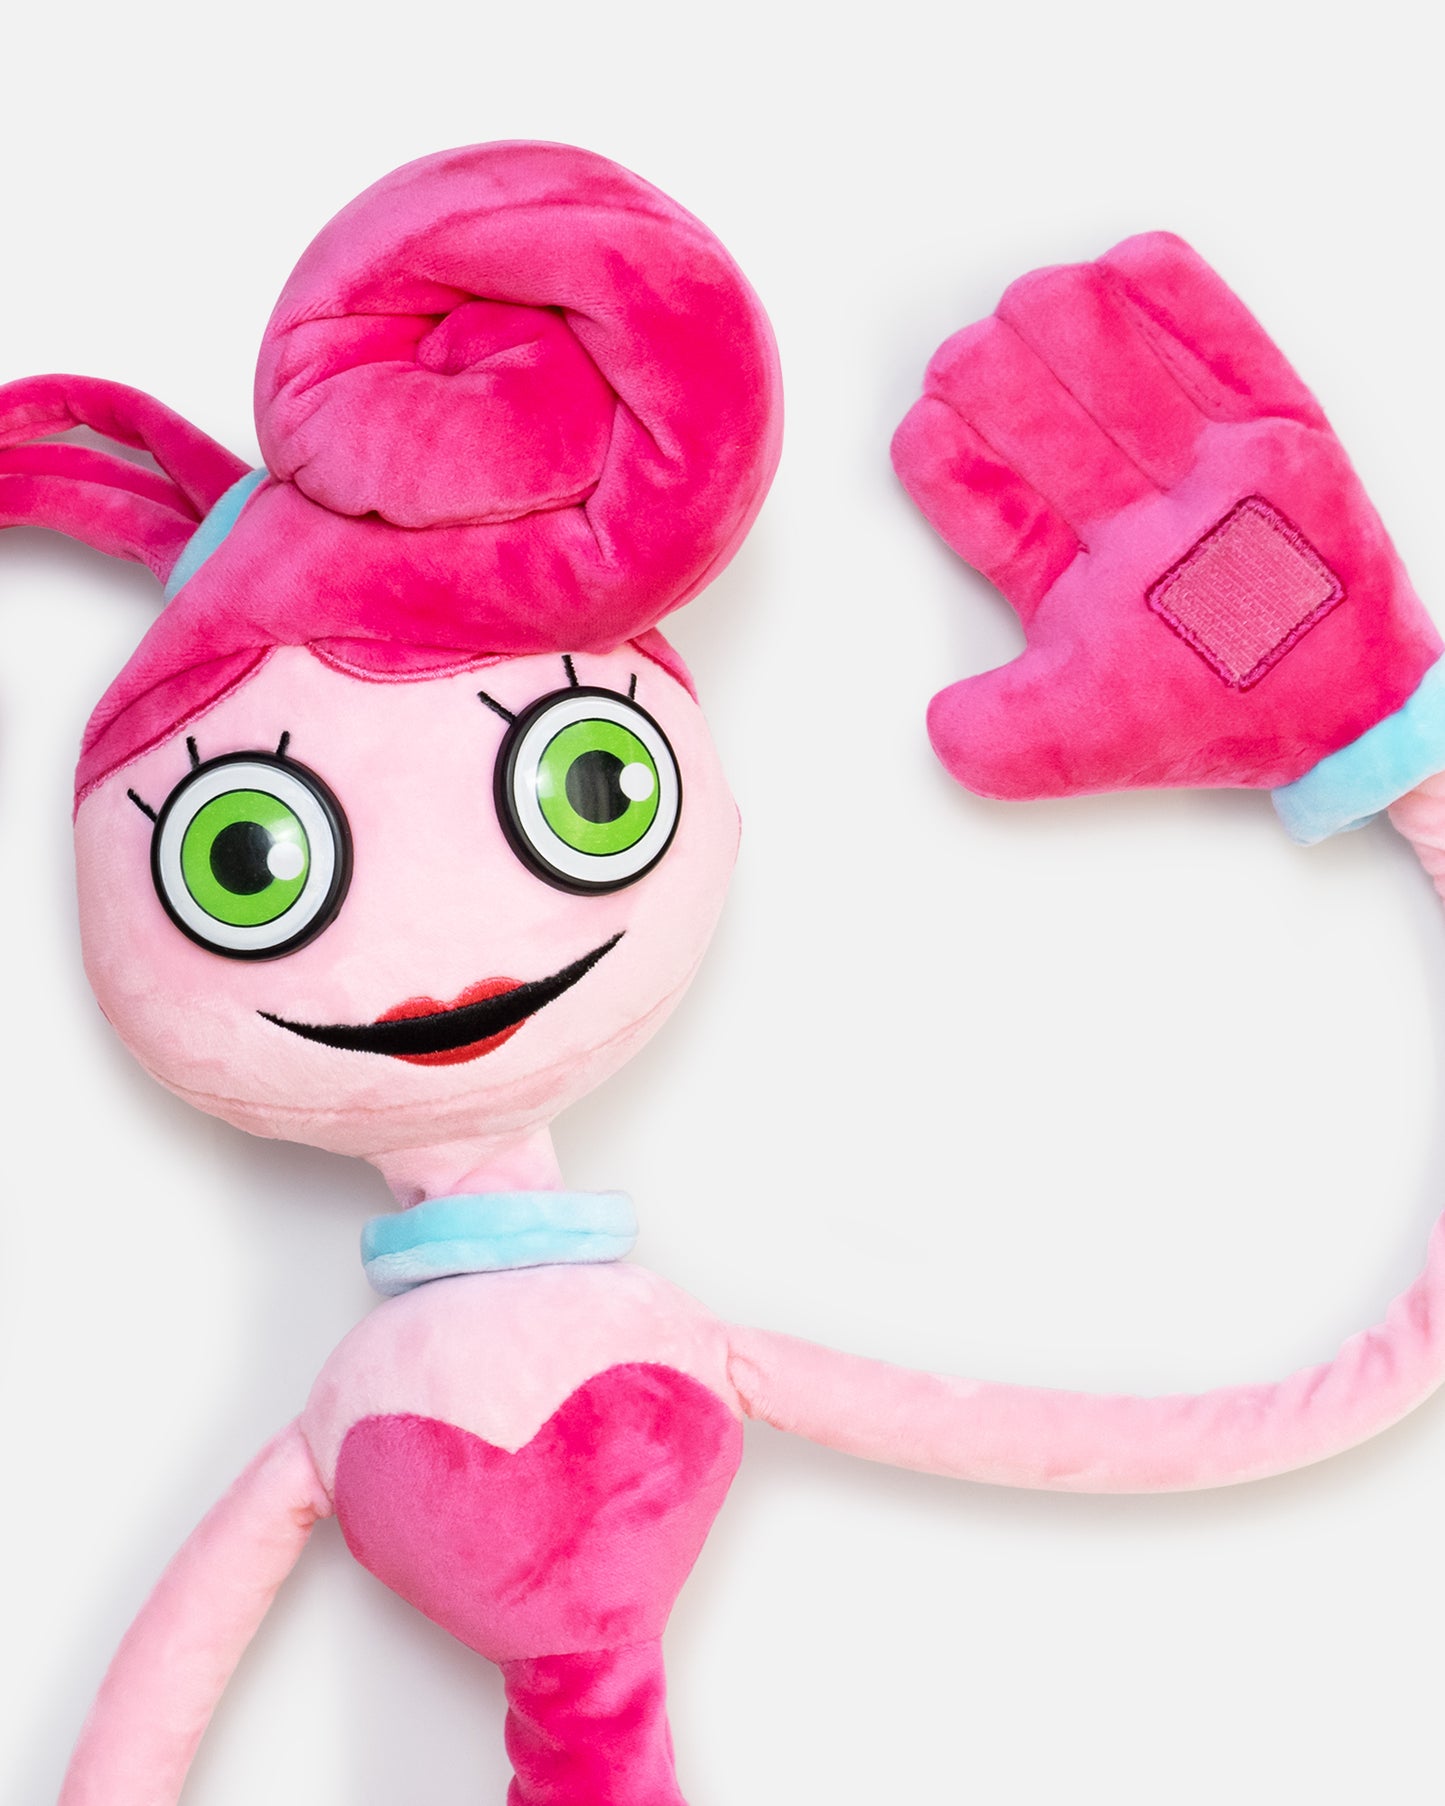 OFFICIAL MOMMY LONG LEGS PLUSH UNBOXING FROM POPPY PLAYTIME CHAPTER 2! 